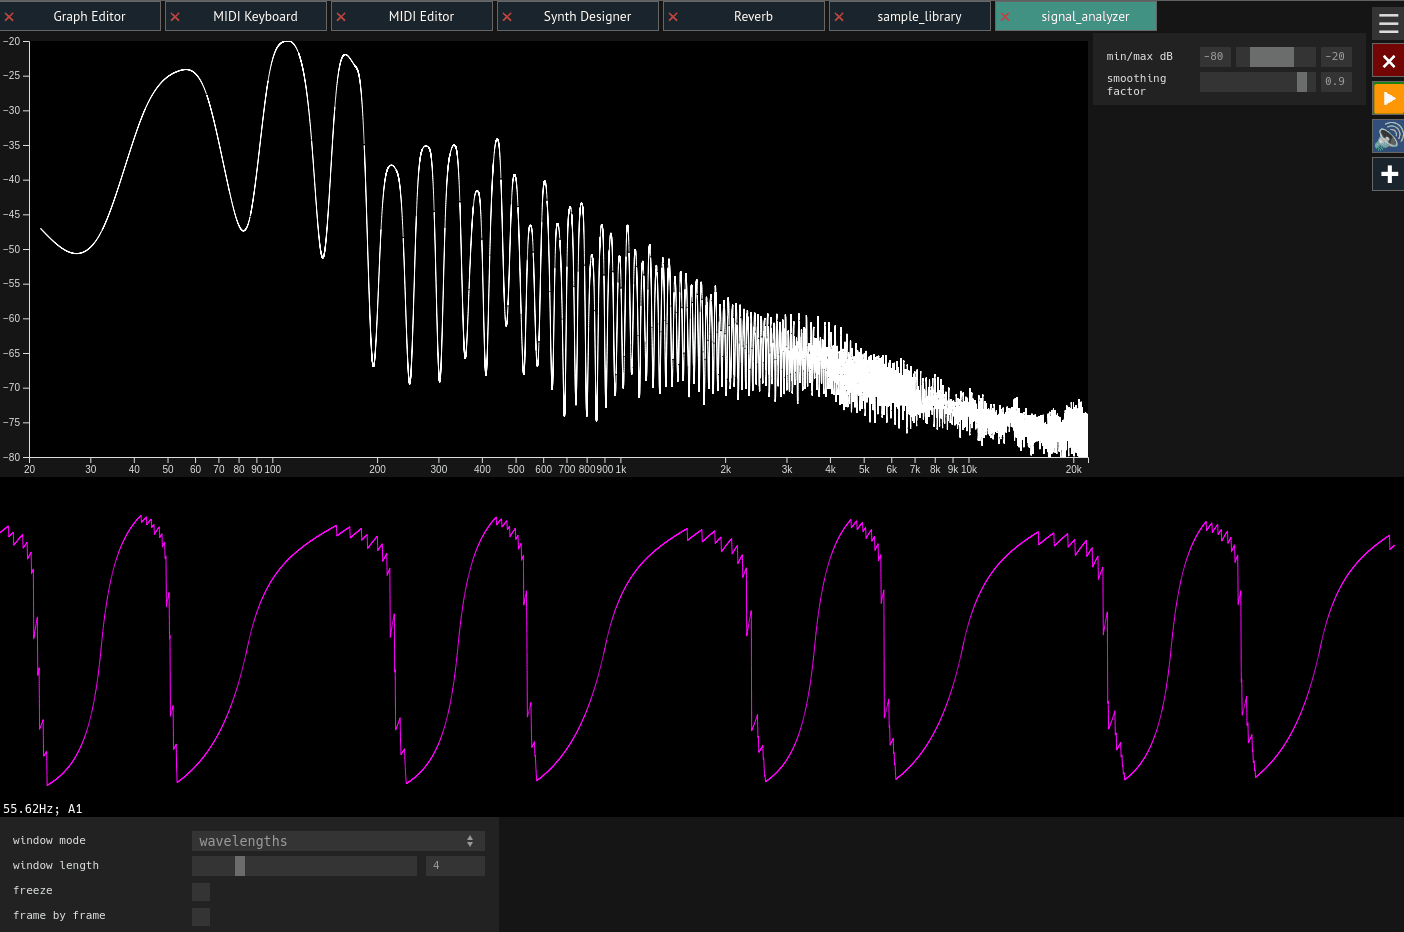 A screenshot of the signal analyzer module in web synth.  It shows a spectrogram rendered as a white line on top, and an oscilloscope rendered as a magenta line on the bottom.  The spectrogram shows a complex spectrum with lots of harmonics, tapering off into the higher frequencies. The oscilloscope shows a distorted supersaw waveform.